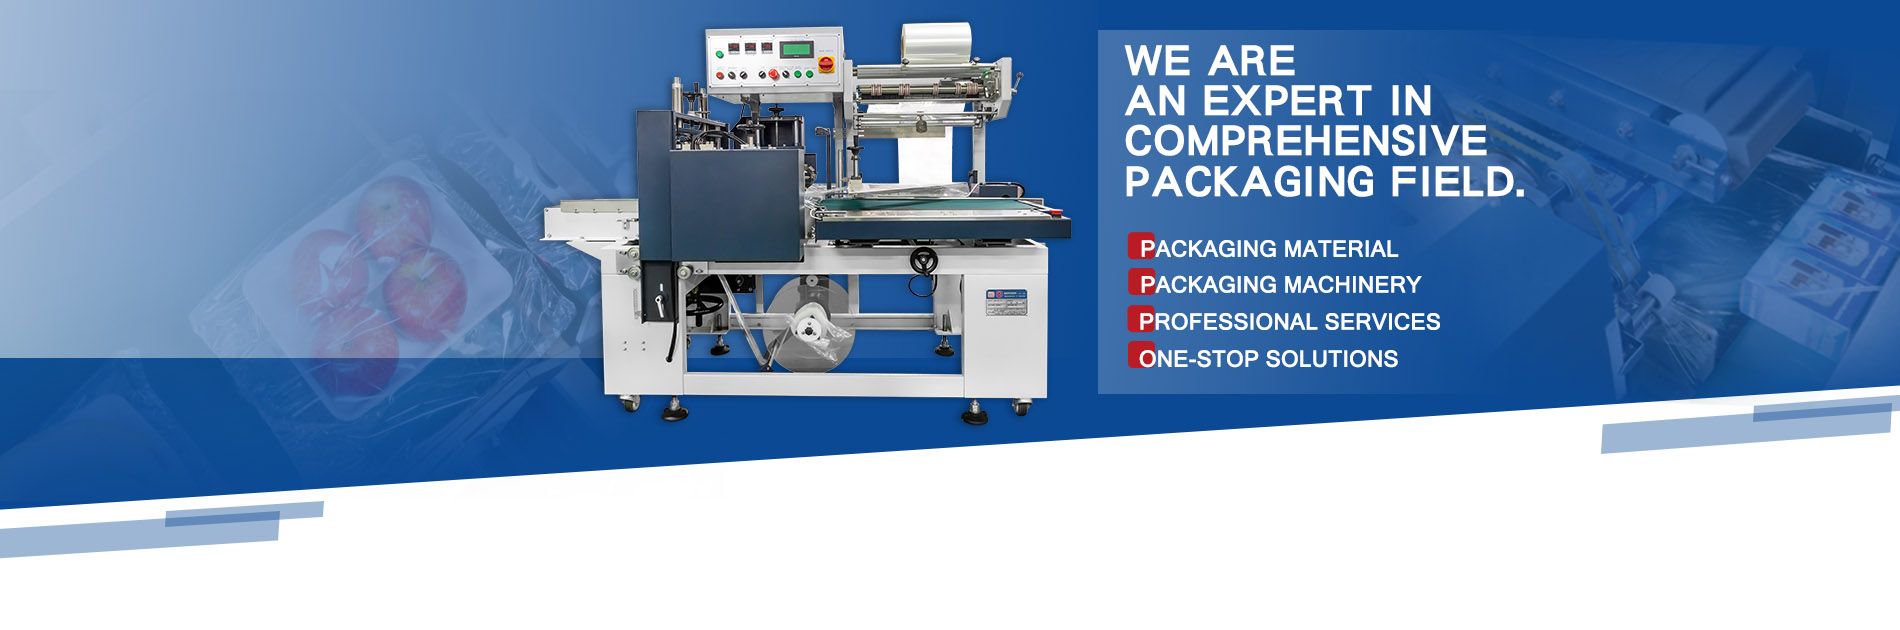 Expert in Total Packaging Solution